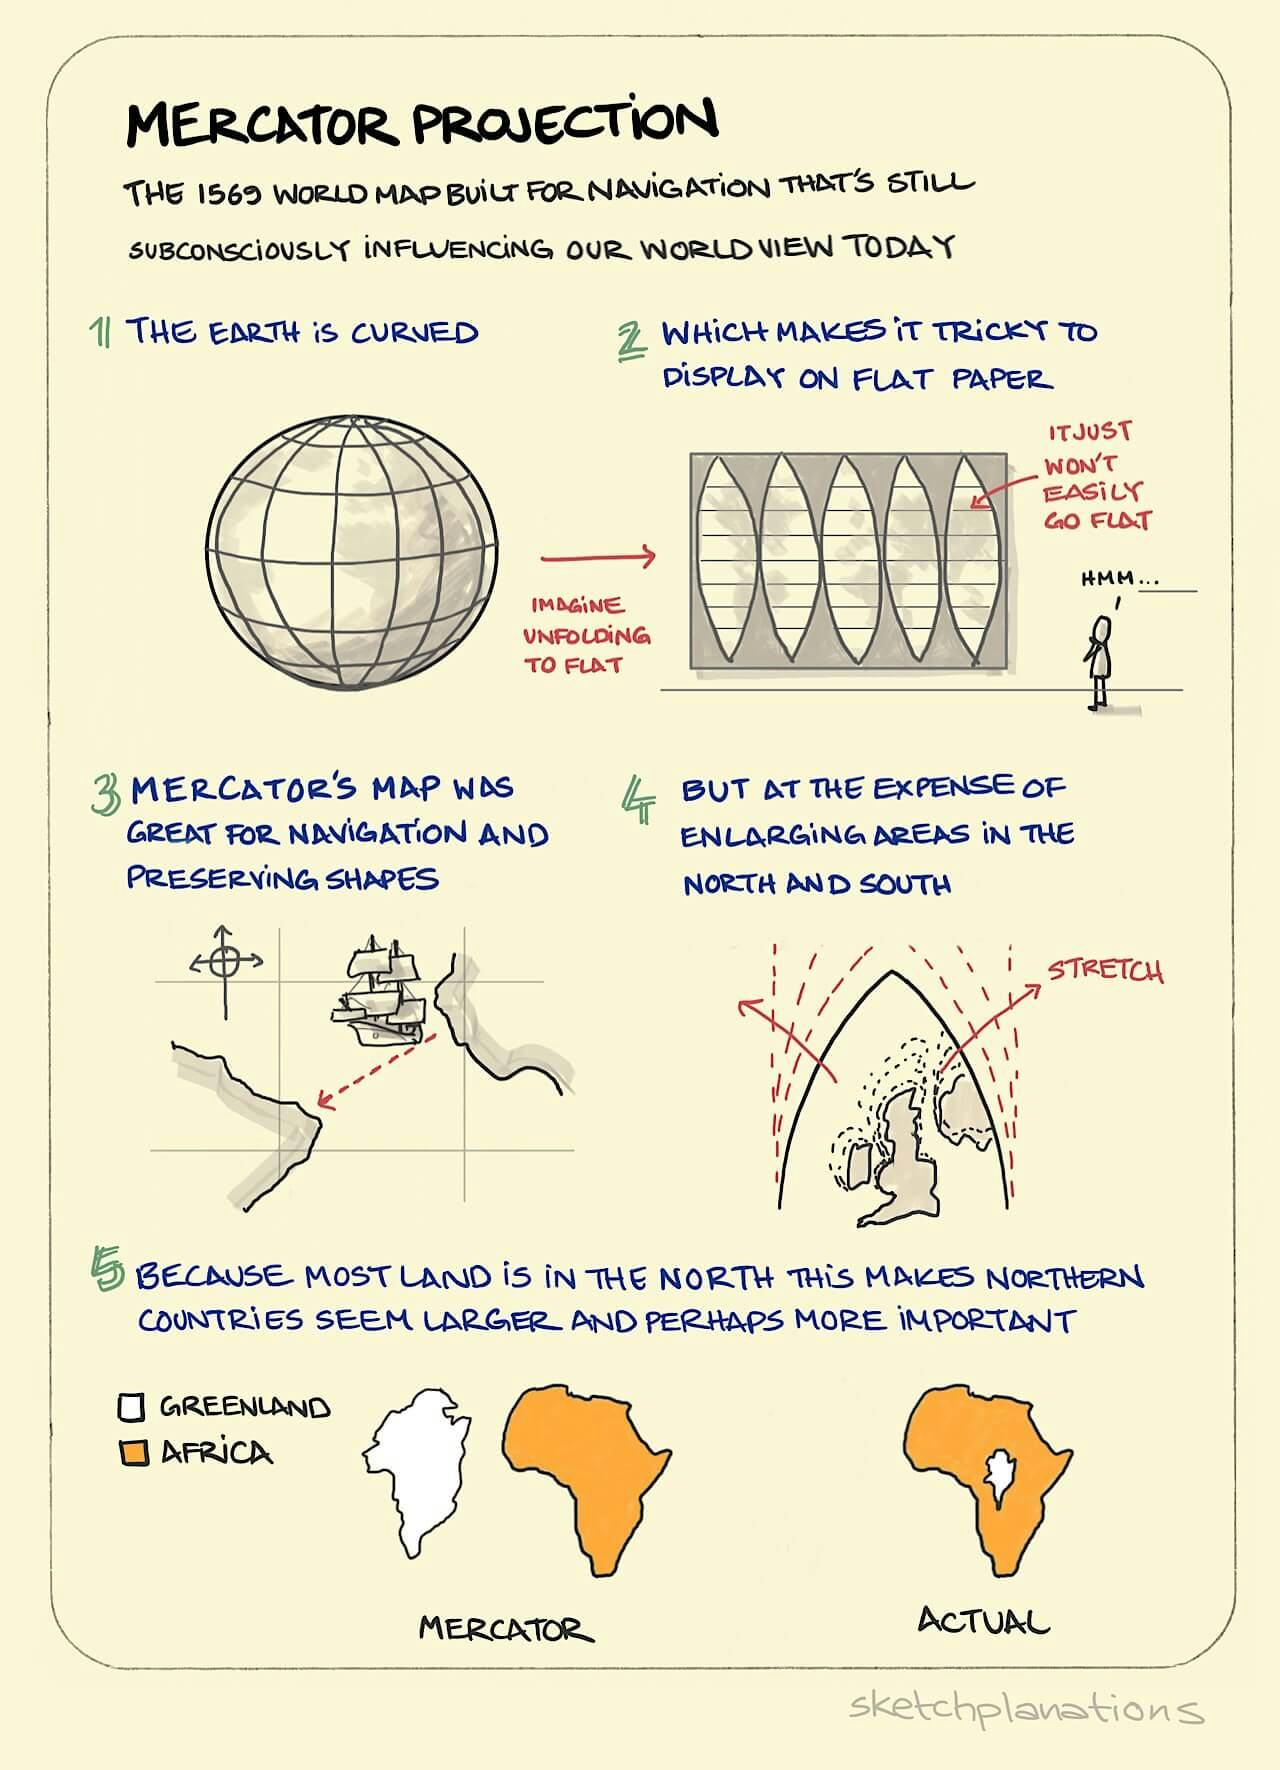 The Mercator projection - Sketchplanations